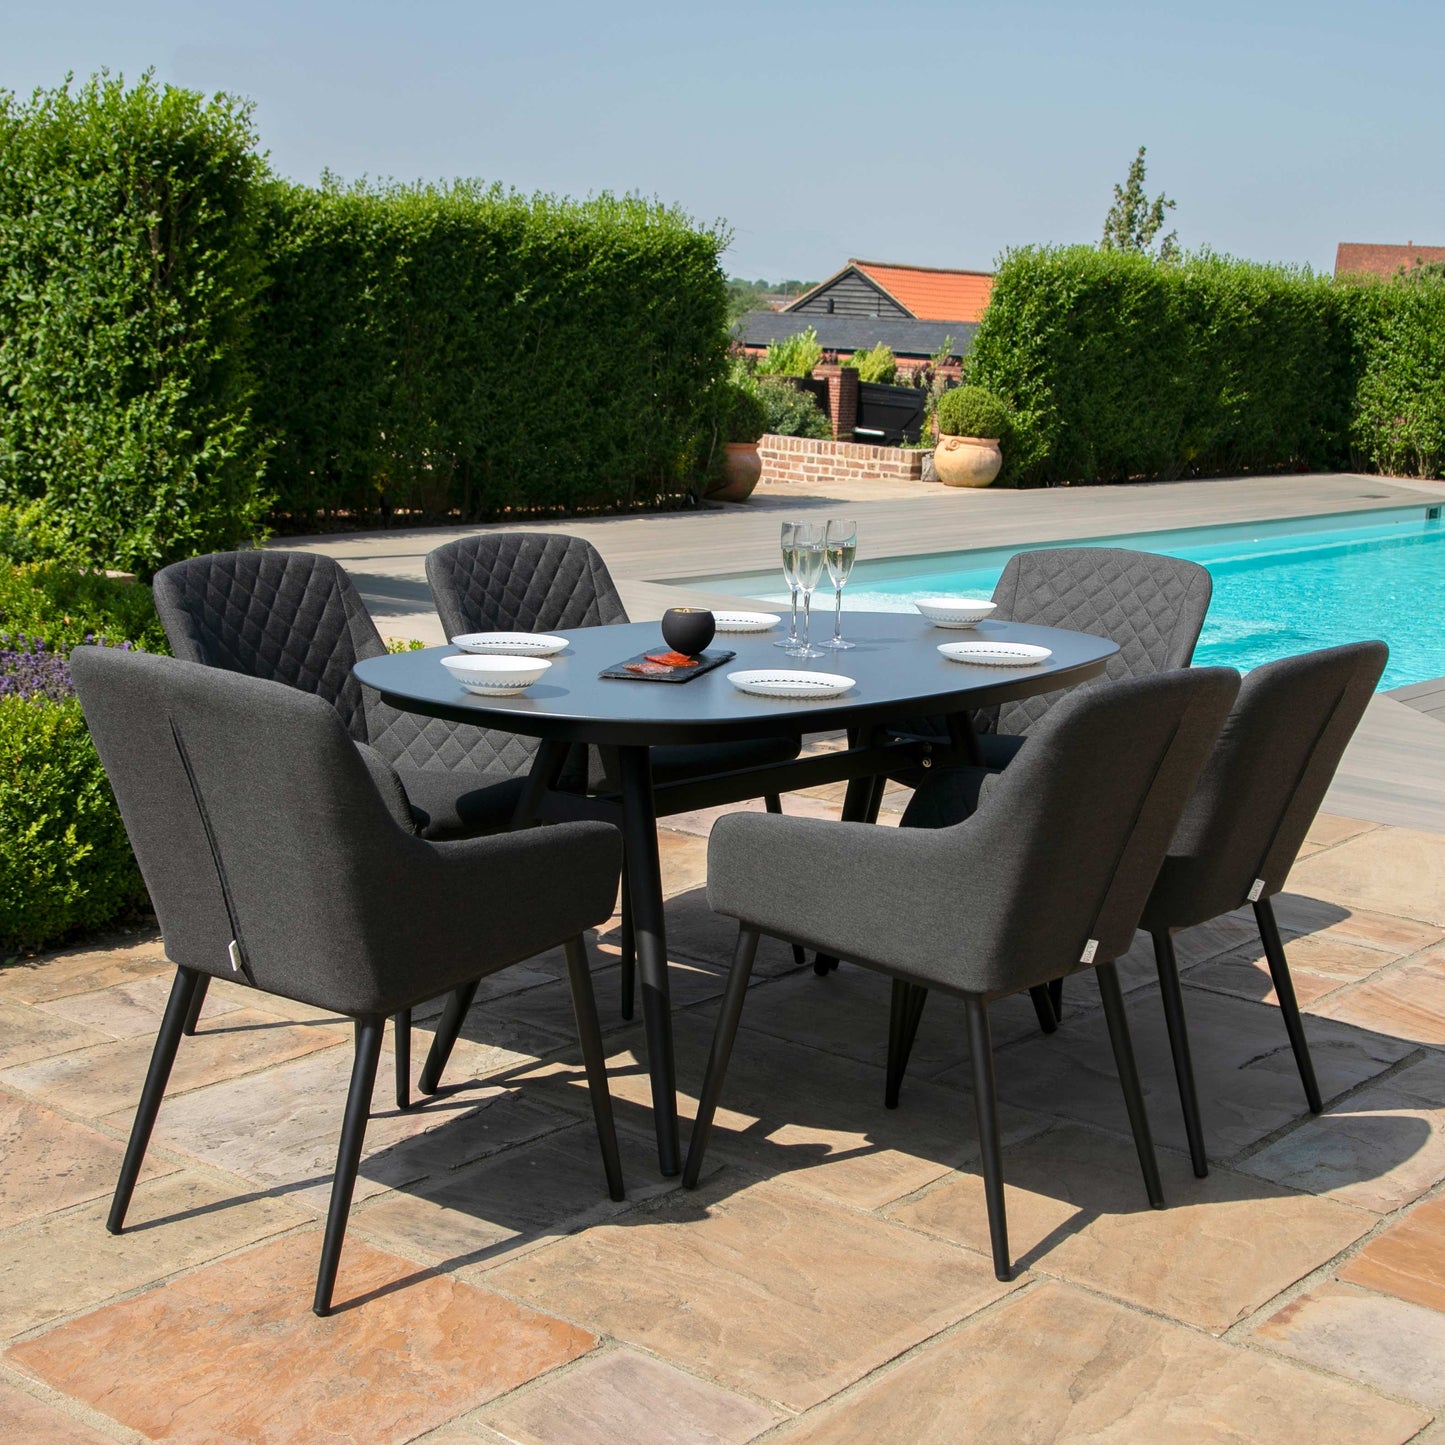 Outdoor Fabric Zest 6 Seat Oval Dining Set